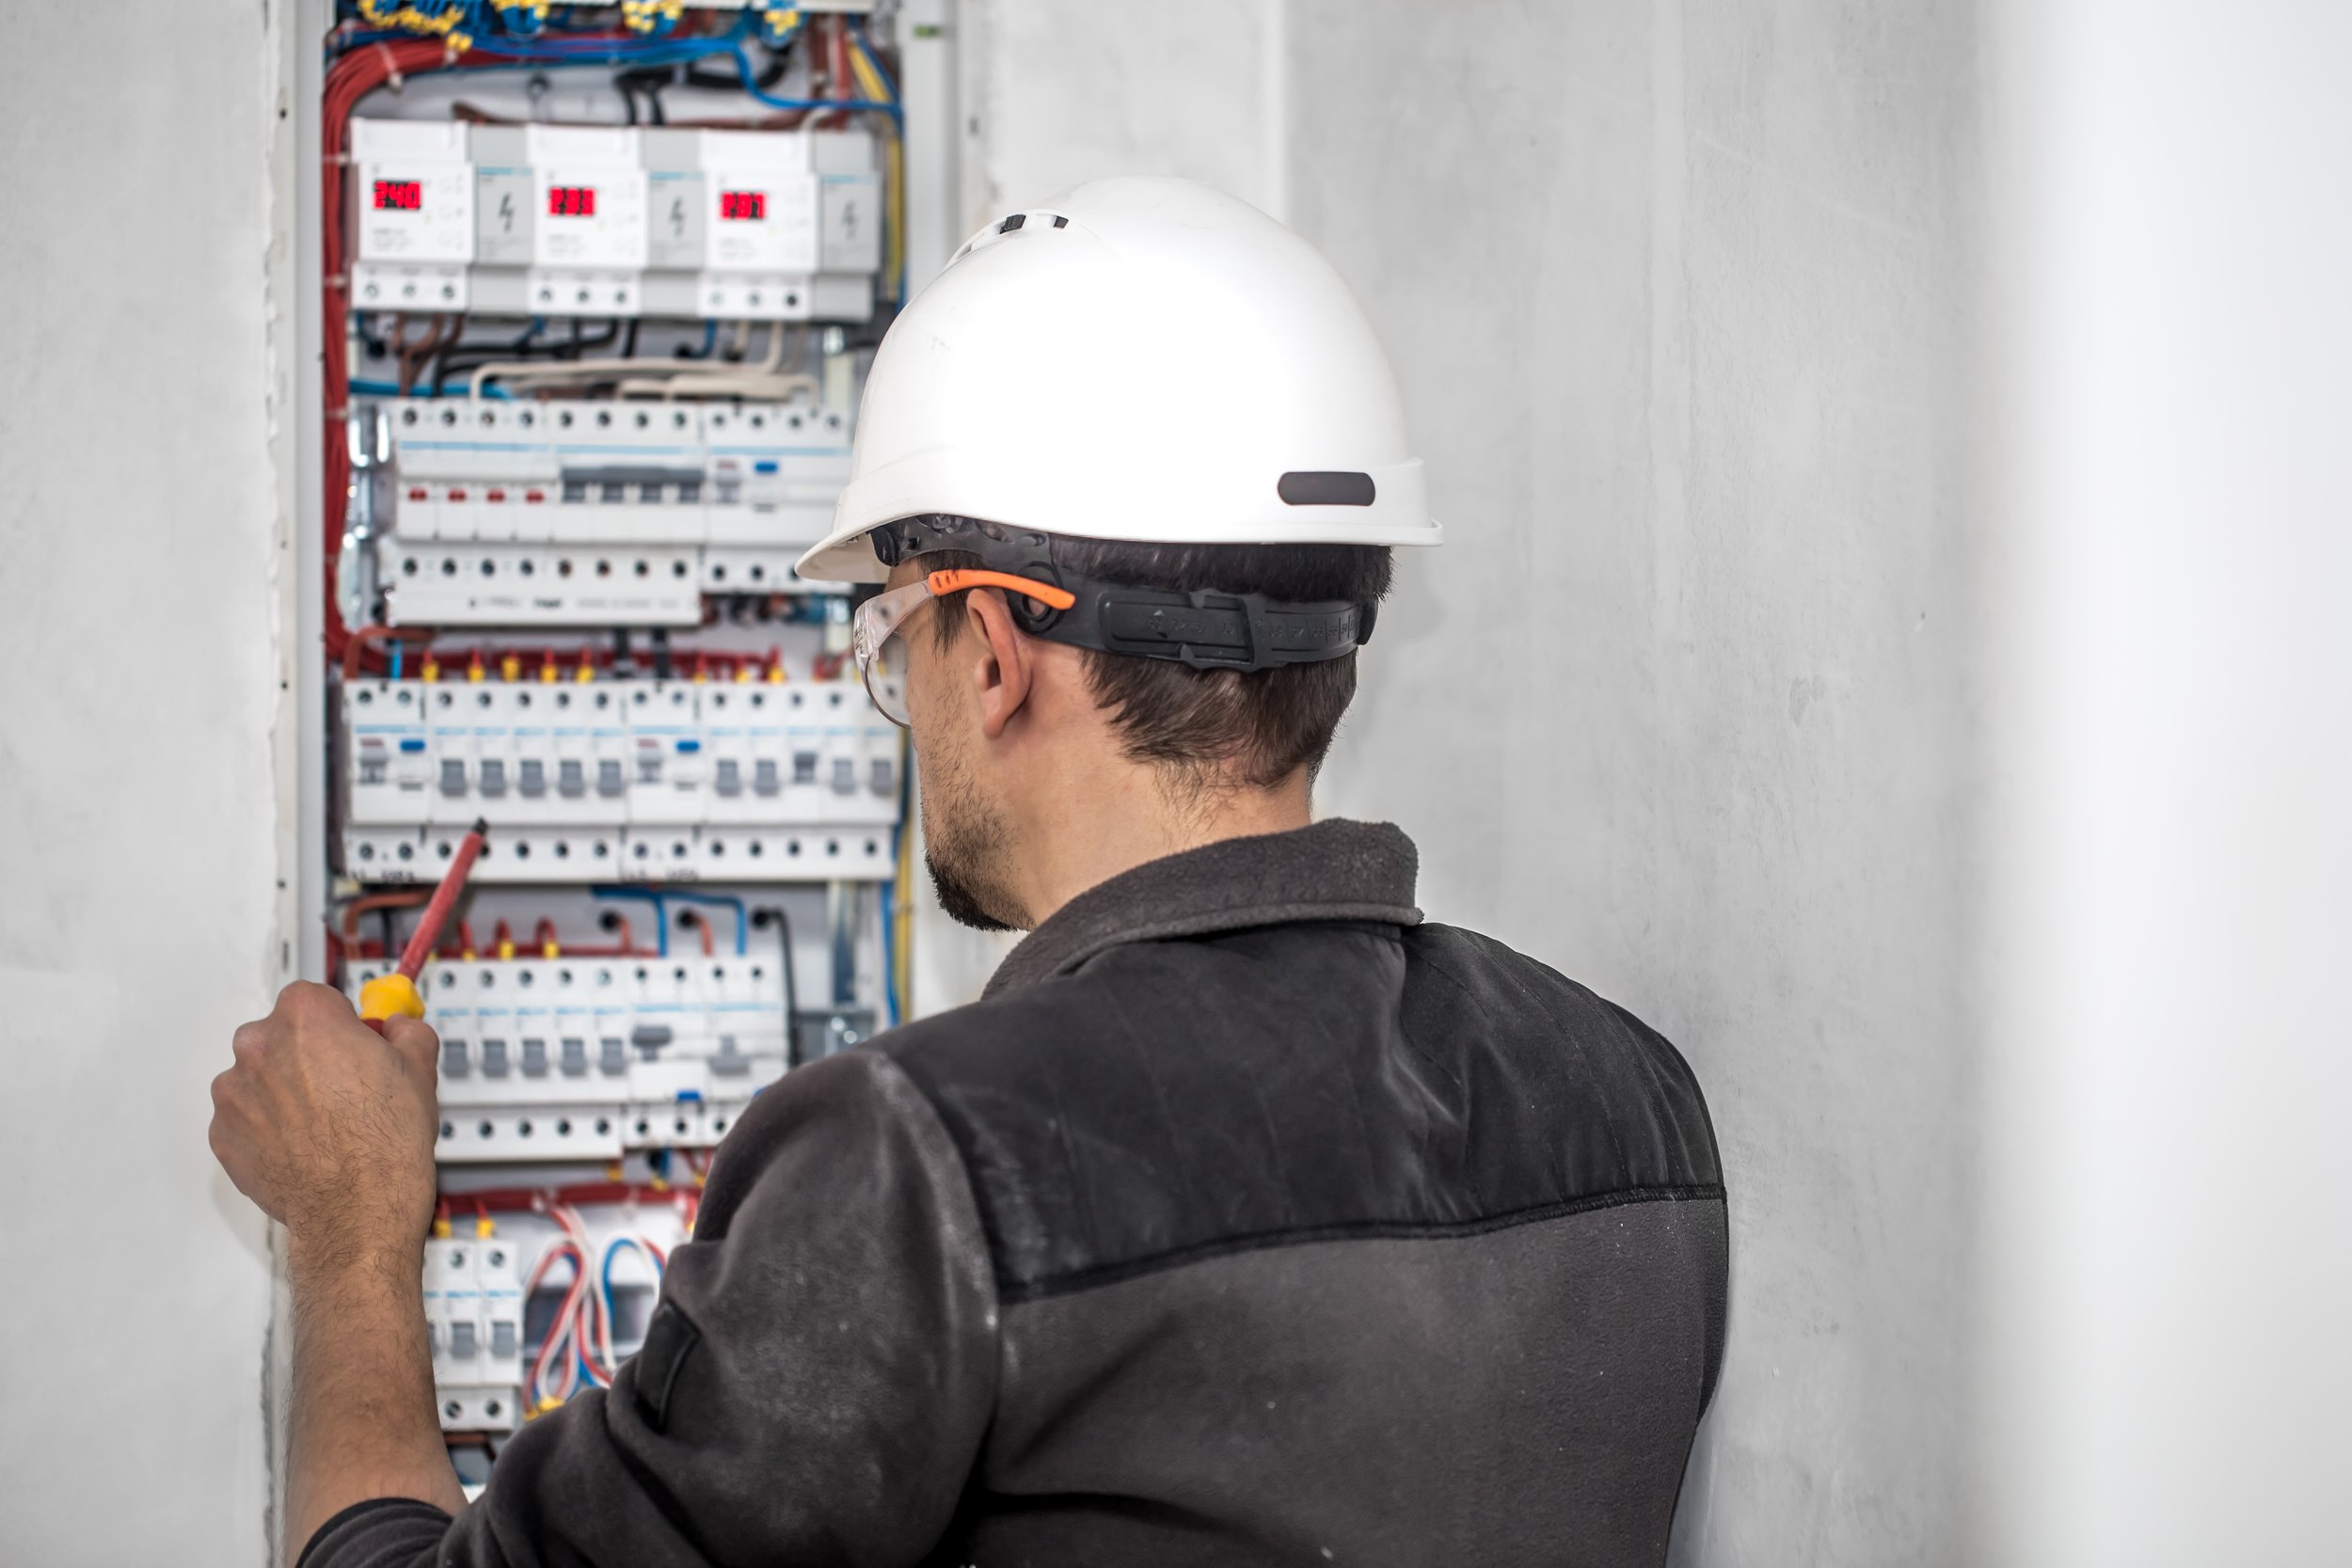 man-electrical-technician-working-switchboard-with-fuses-installation-connection-electrical-equipment.jpg